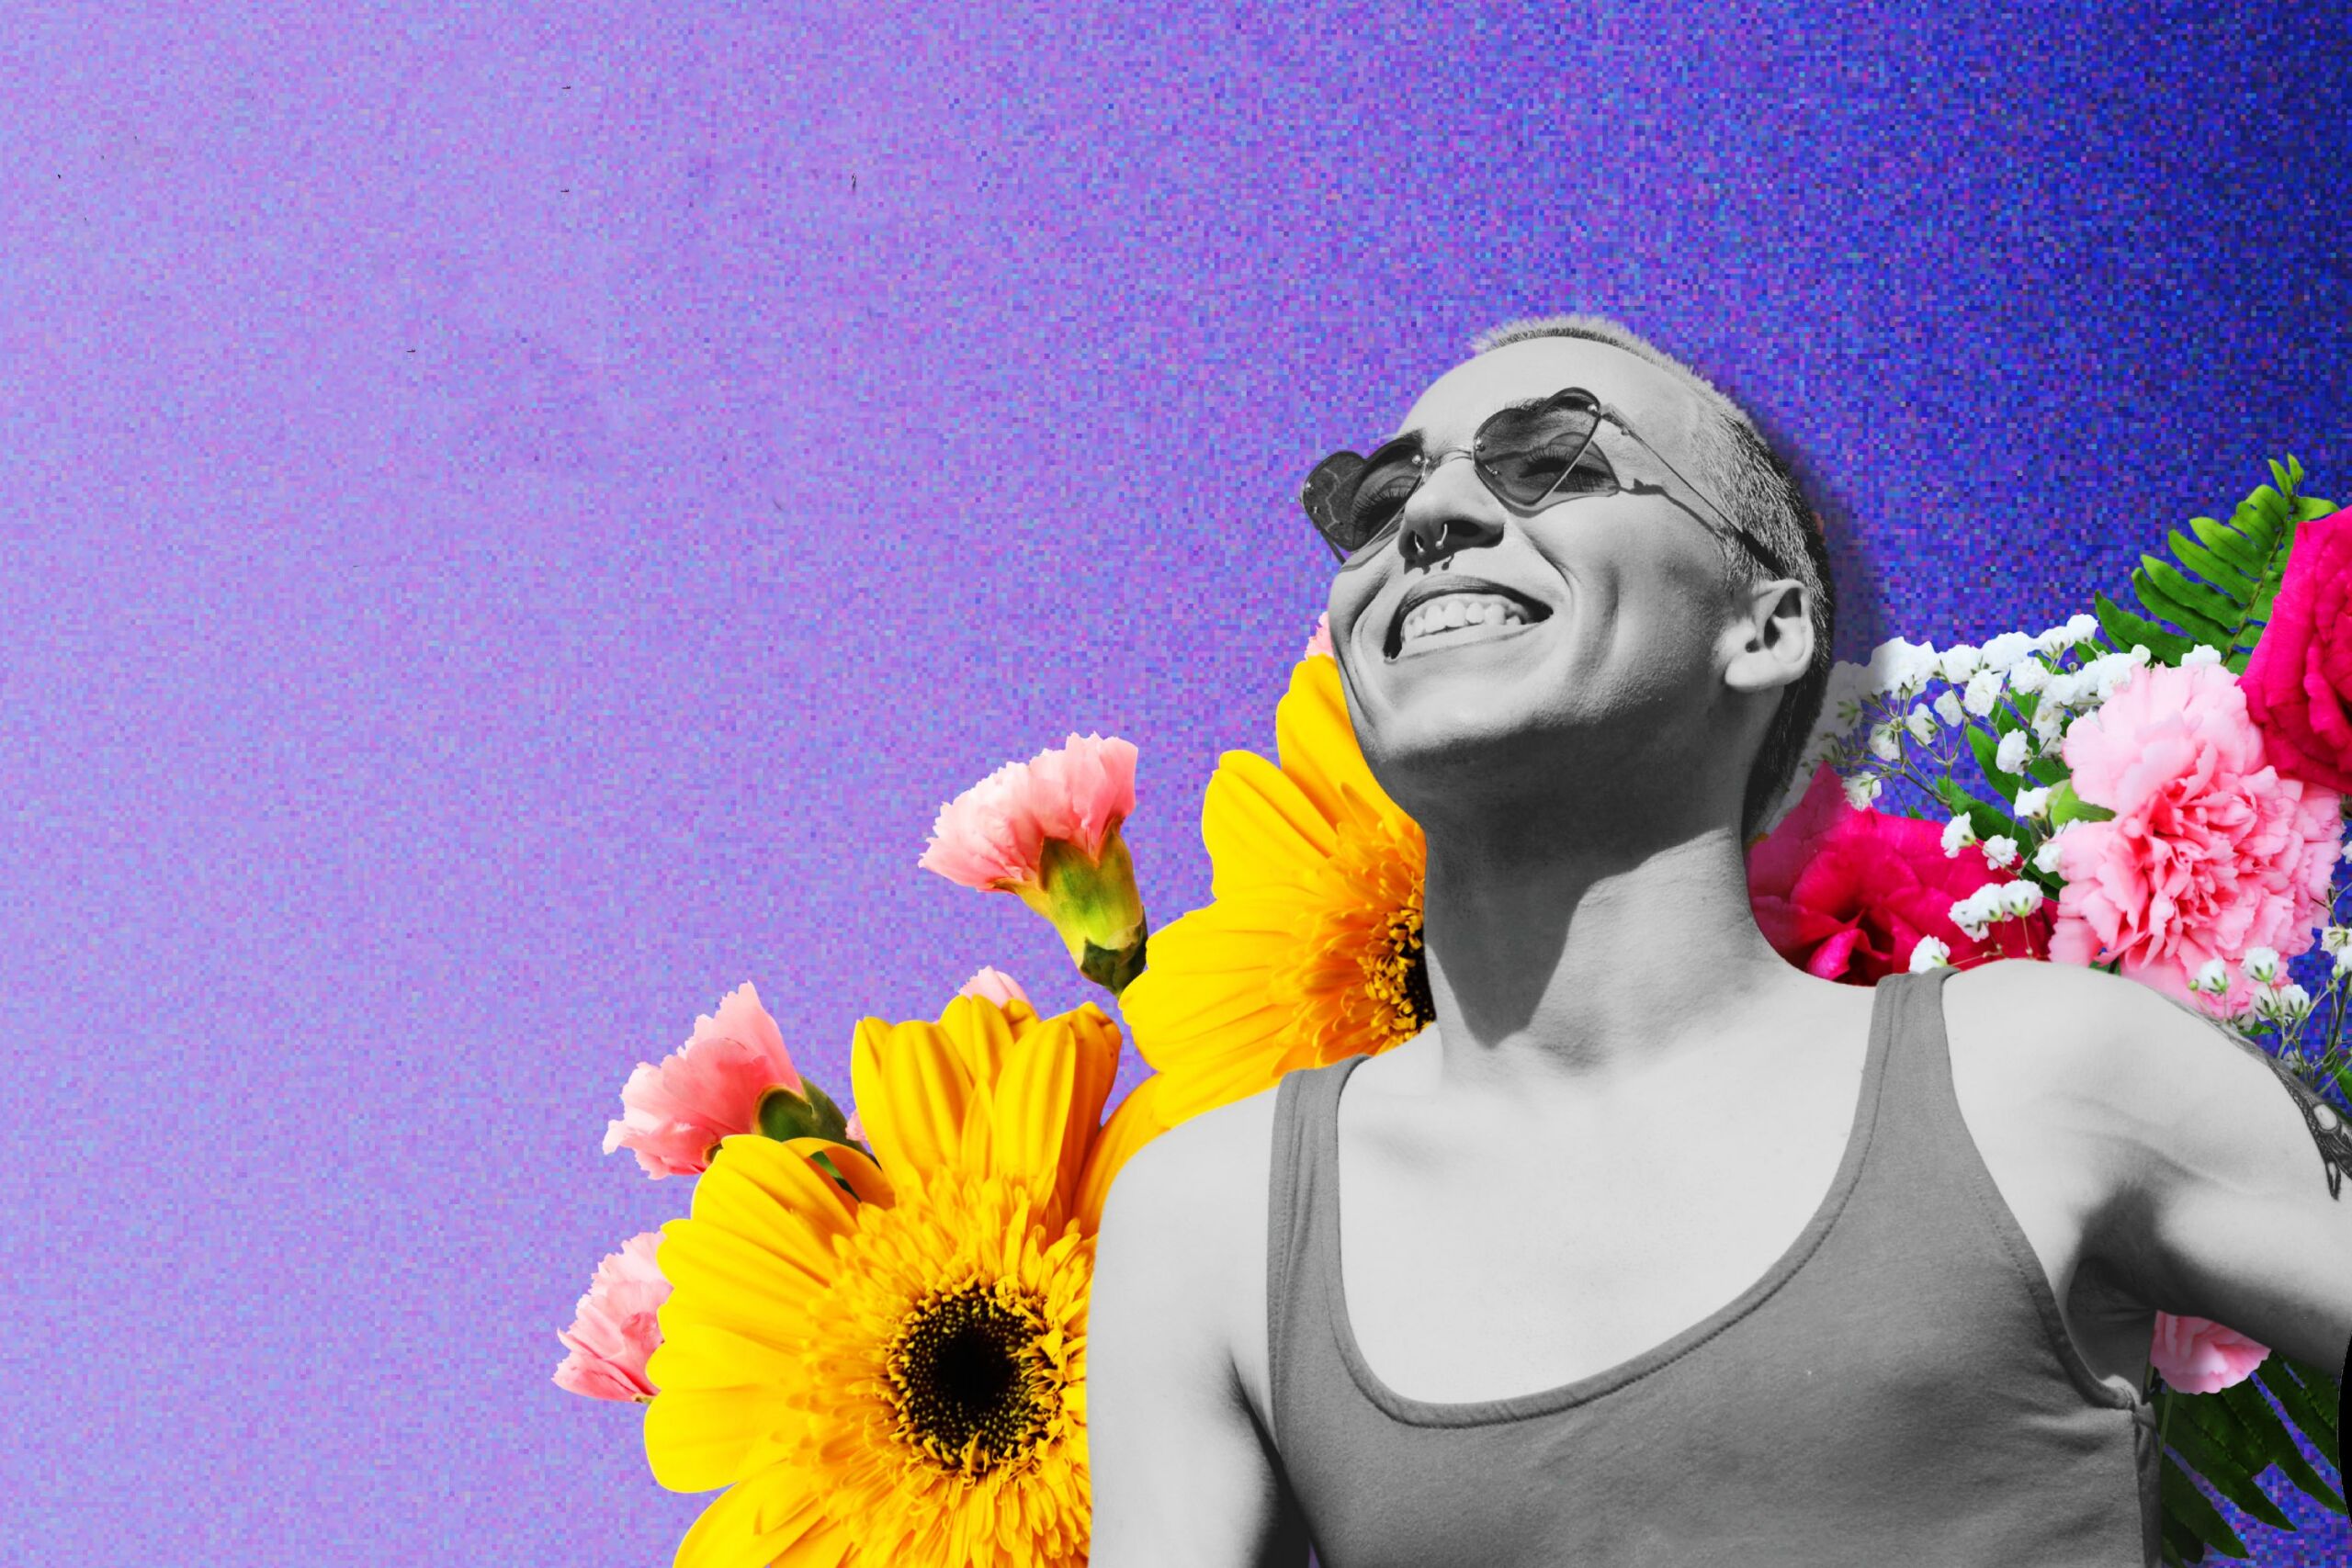 A girl with a tank top and sunglasses against a virtual background of flowers and violet